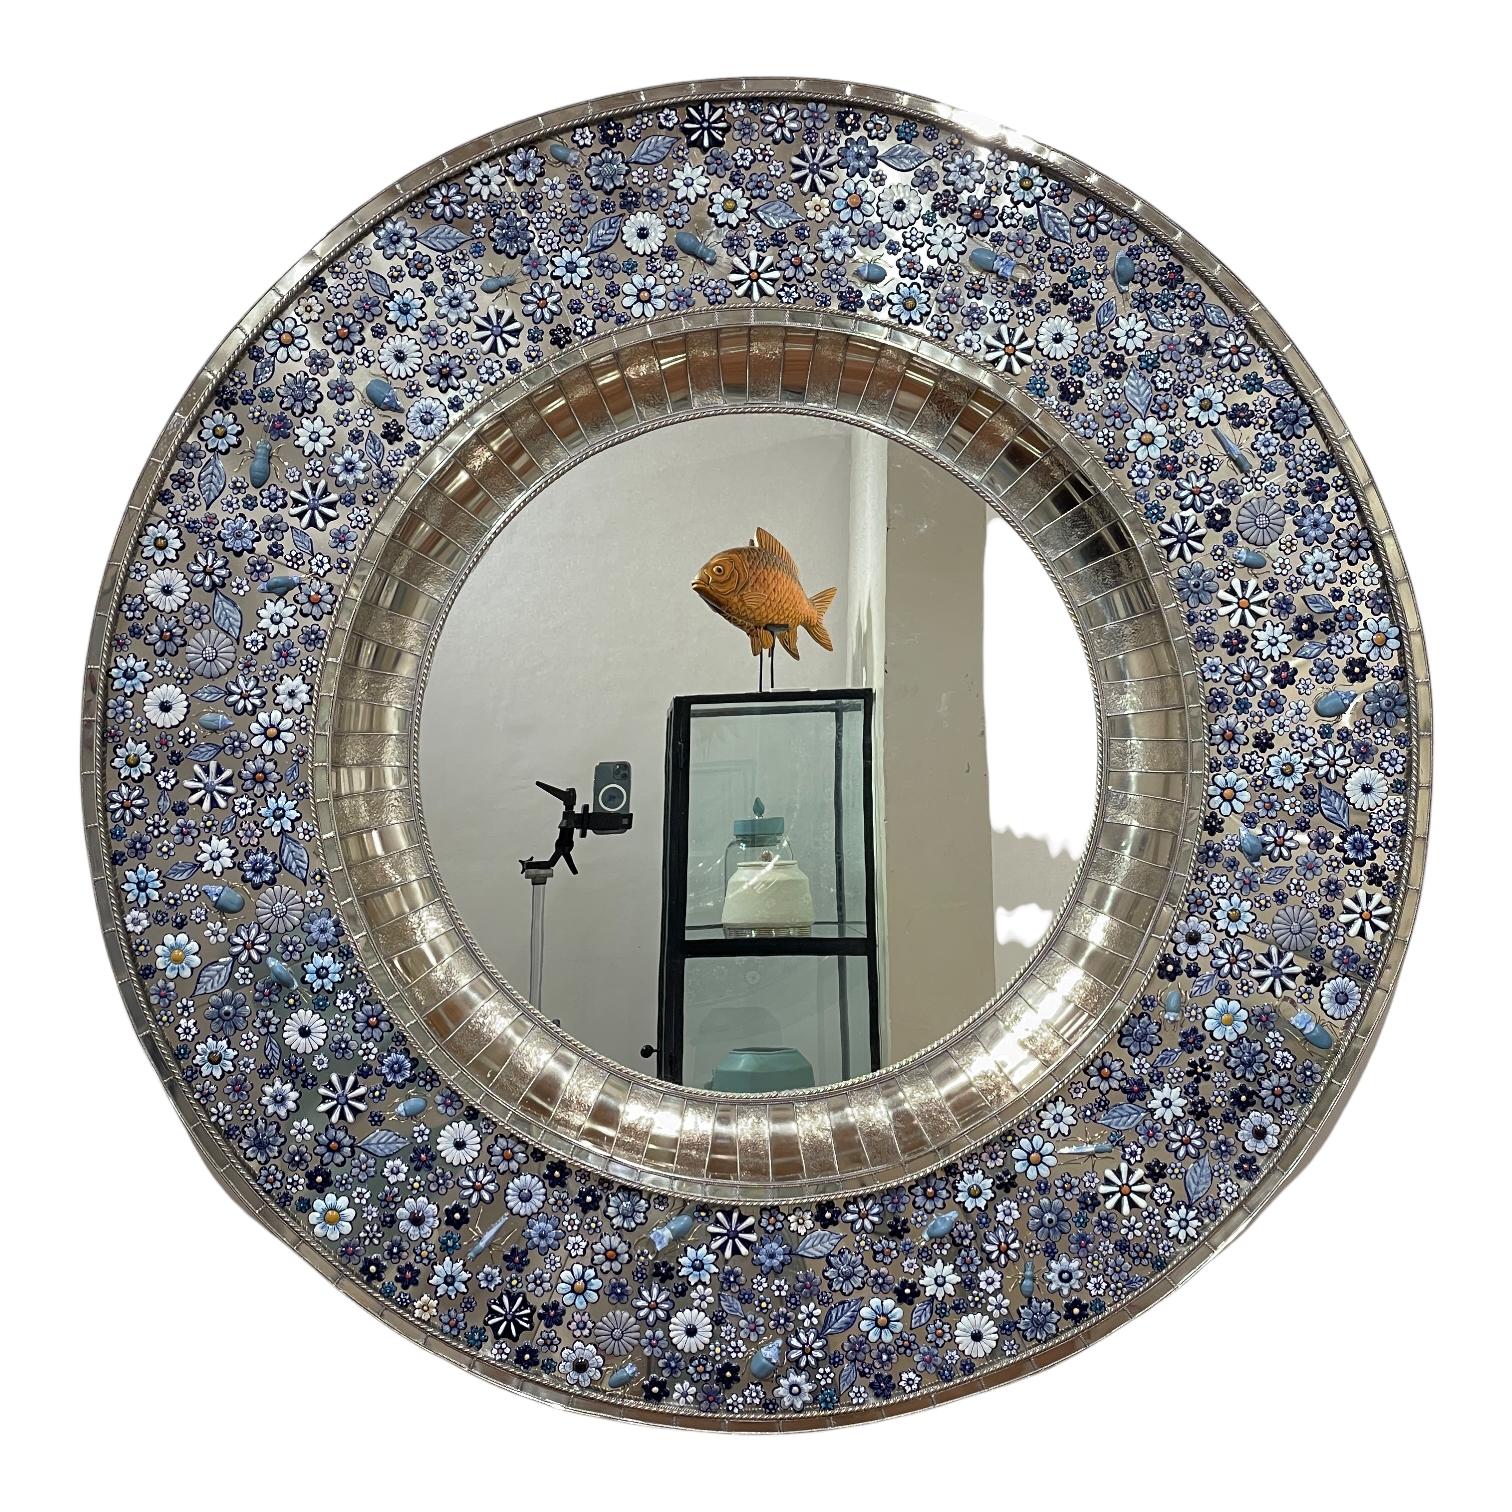 Glazed Roundy Convex Mirror, Hand Painted Ceramic Flowers and Insects over White Metal